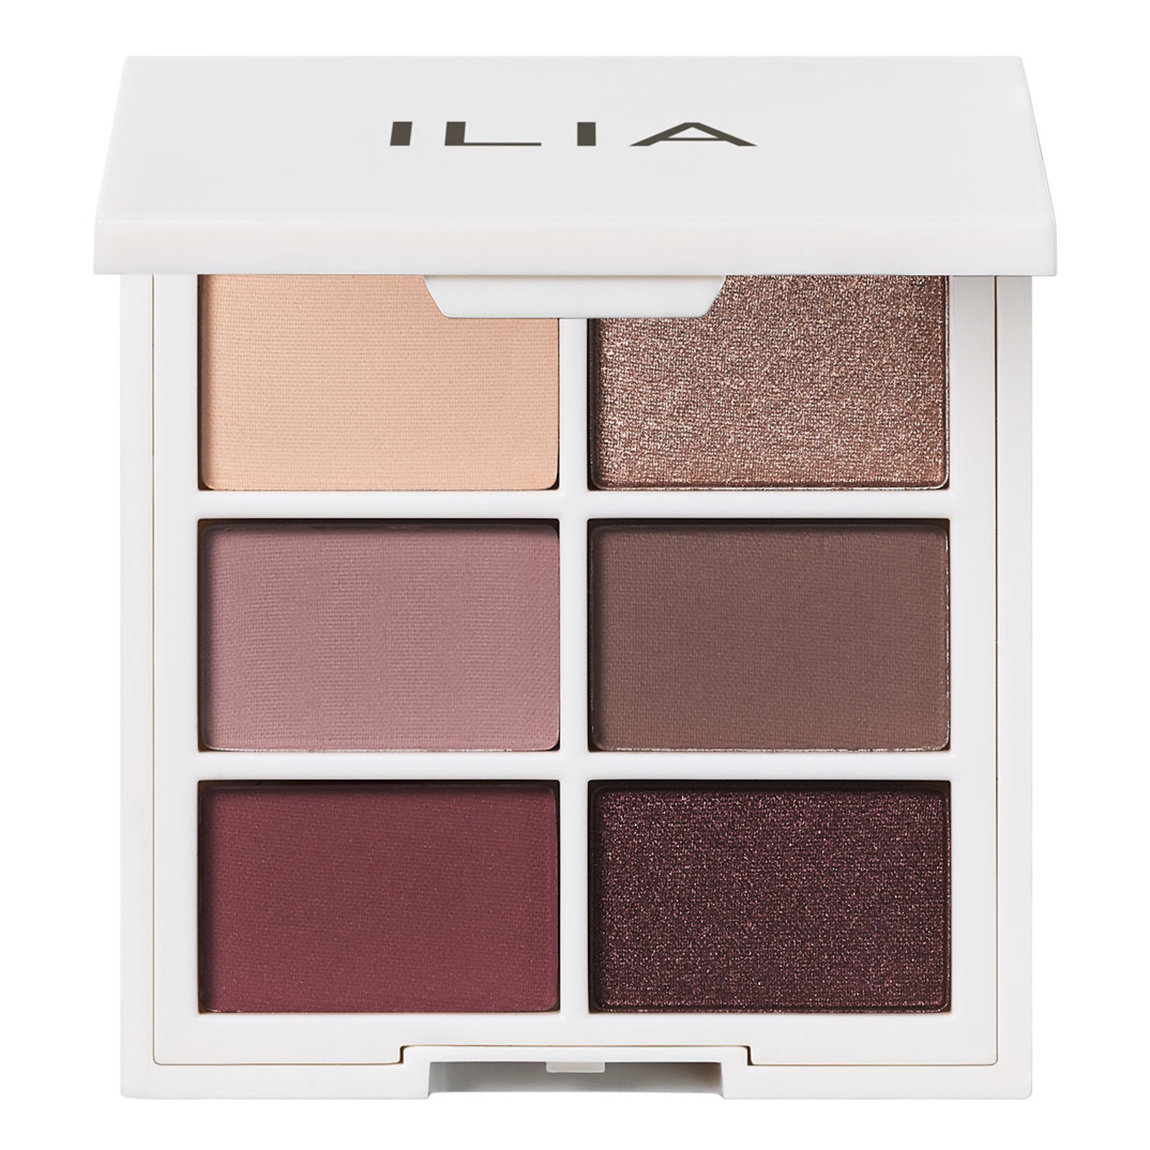 ILIA The Necessary Eyeshadow Palette Cool Nude alternative view 1 - product swatch.